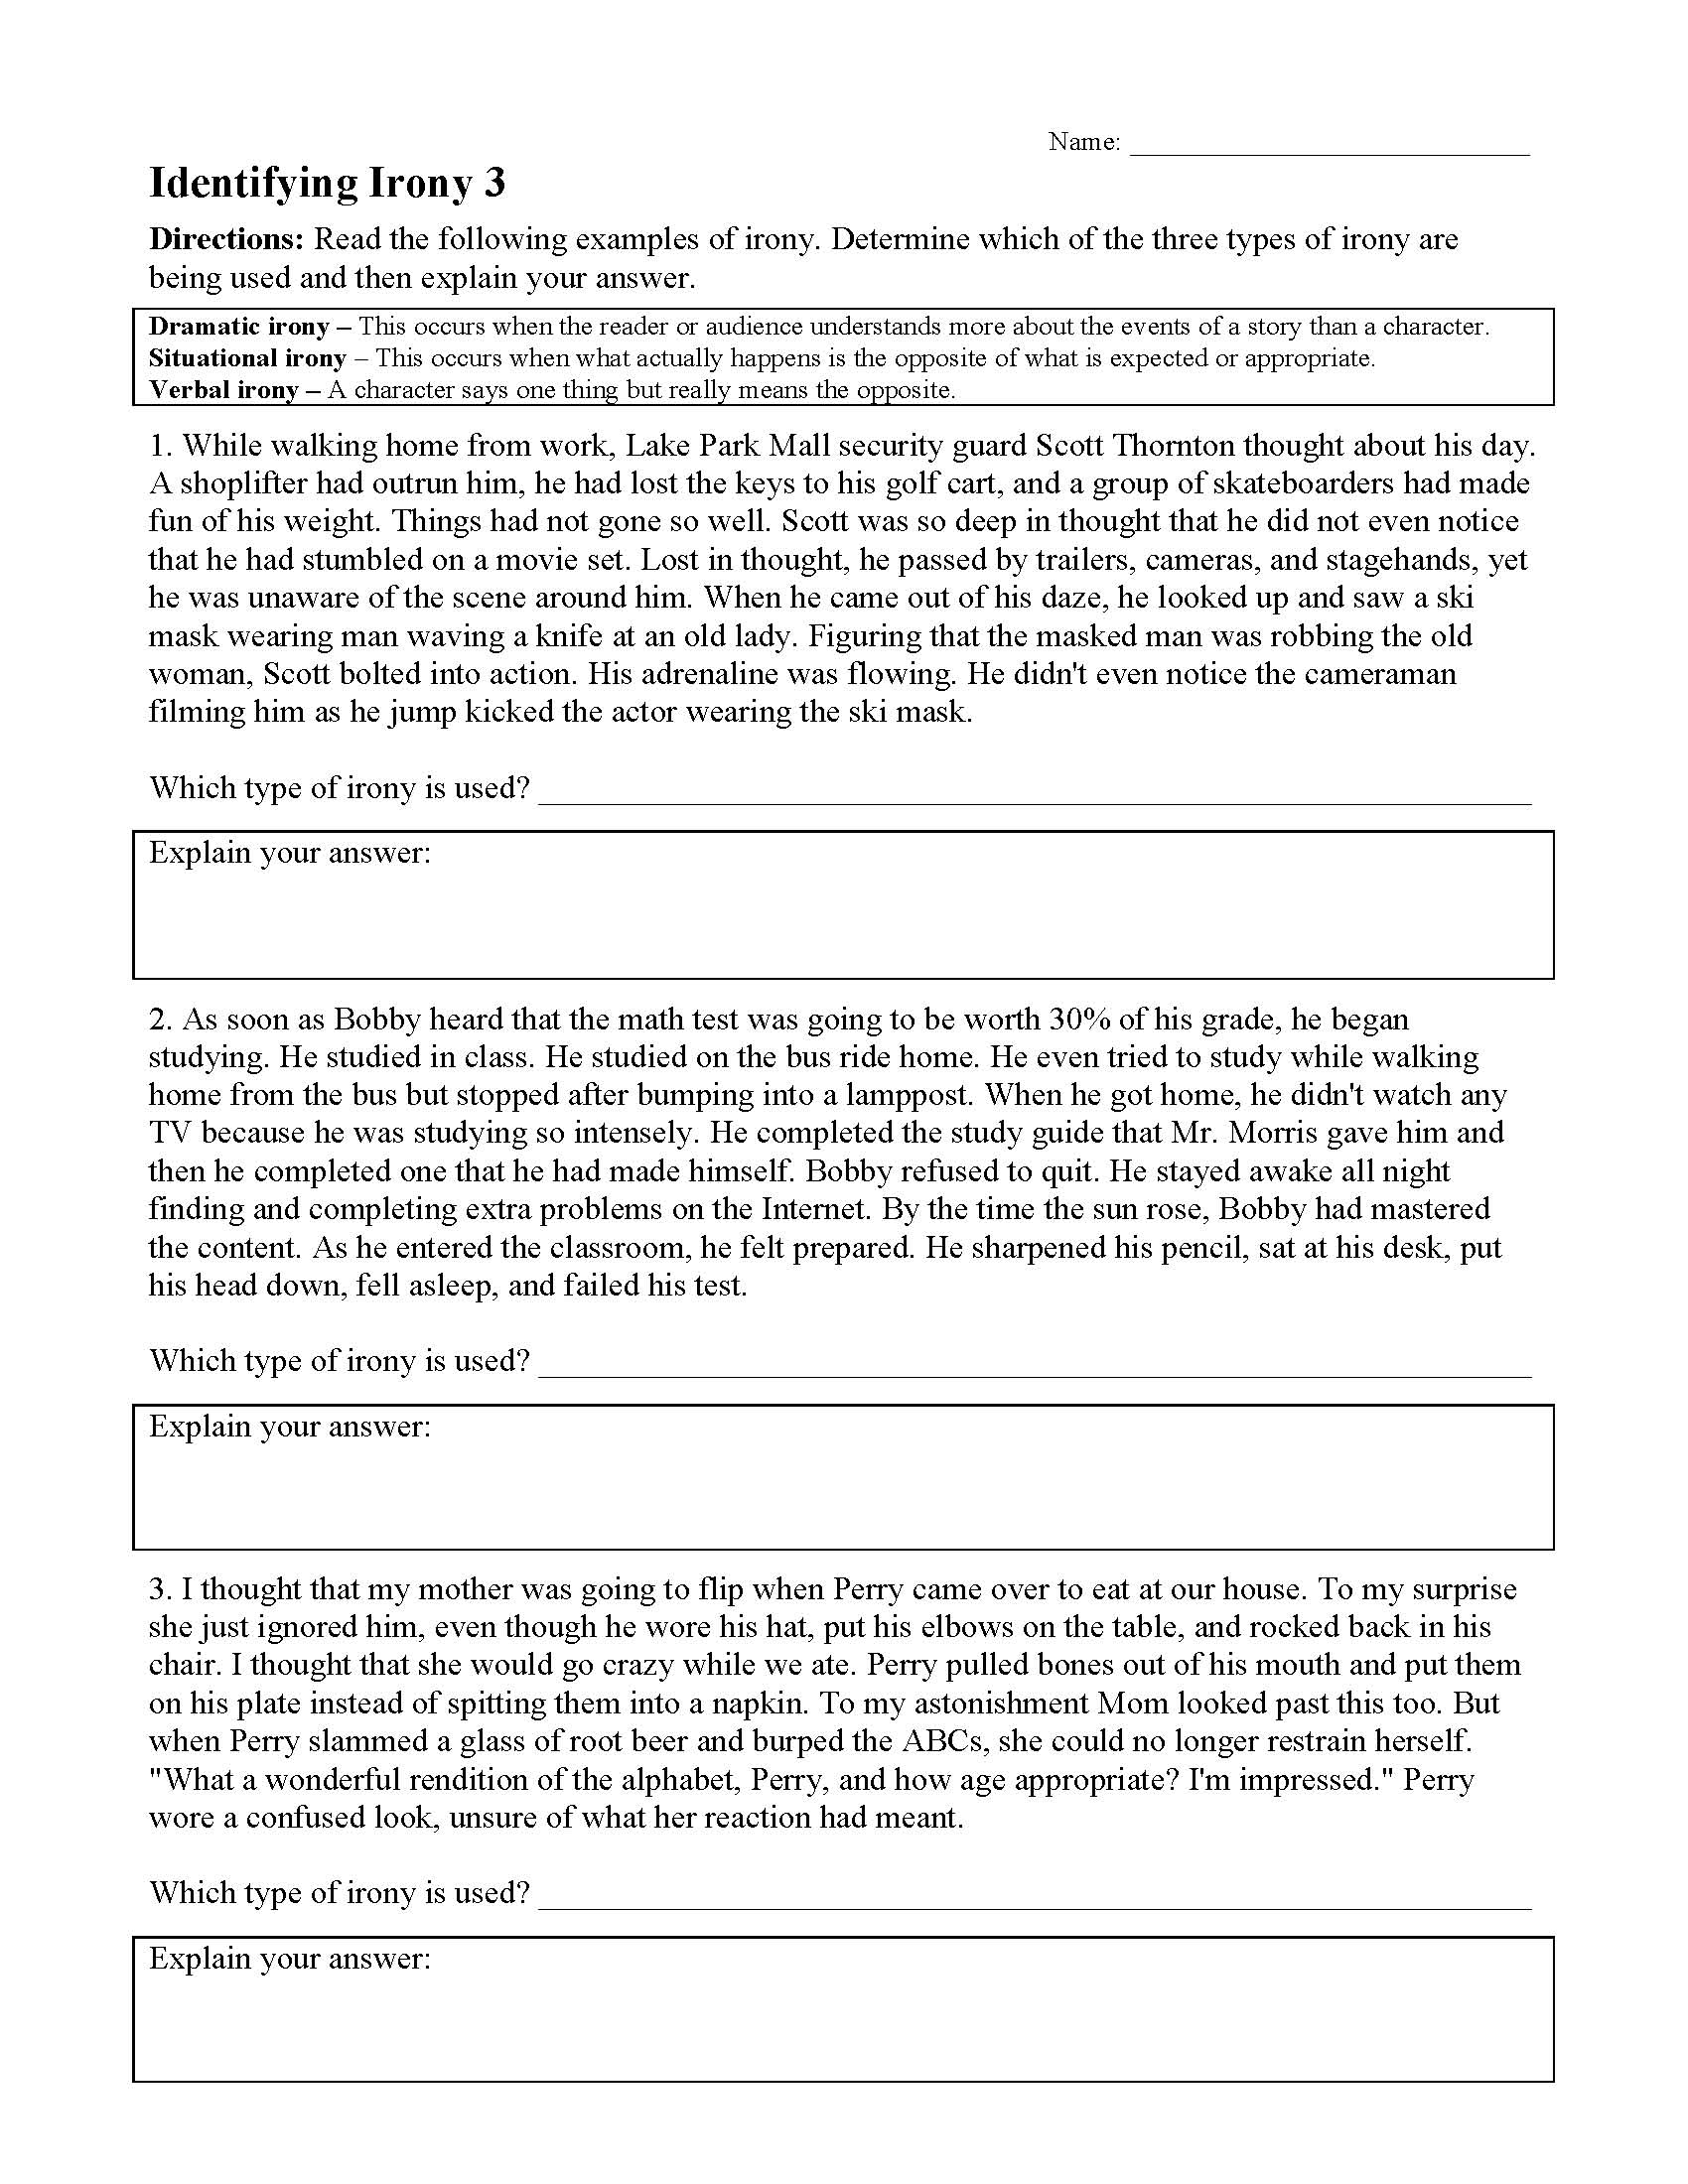 This is a preview image of Irony Worksheet 3. Click on it to enlarge it or view the source file.